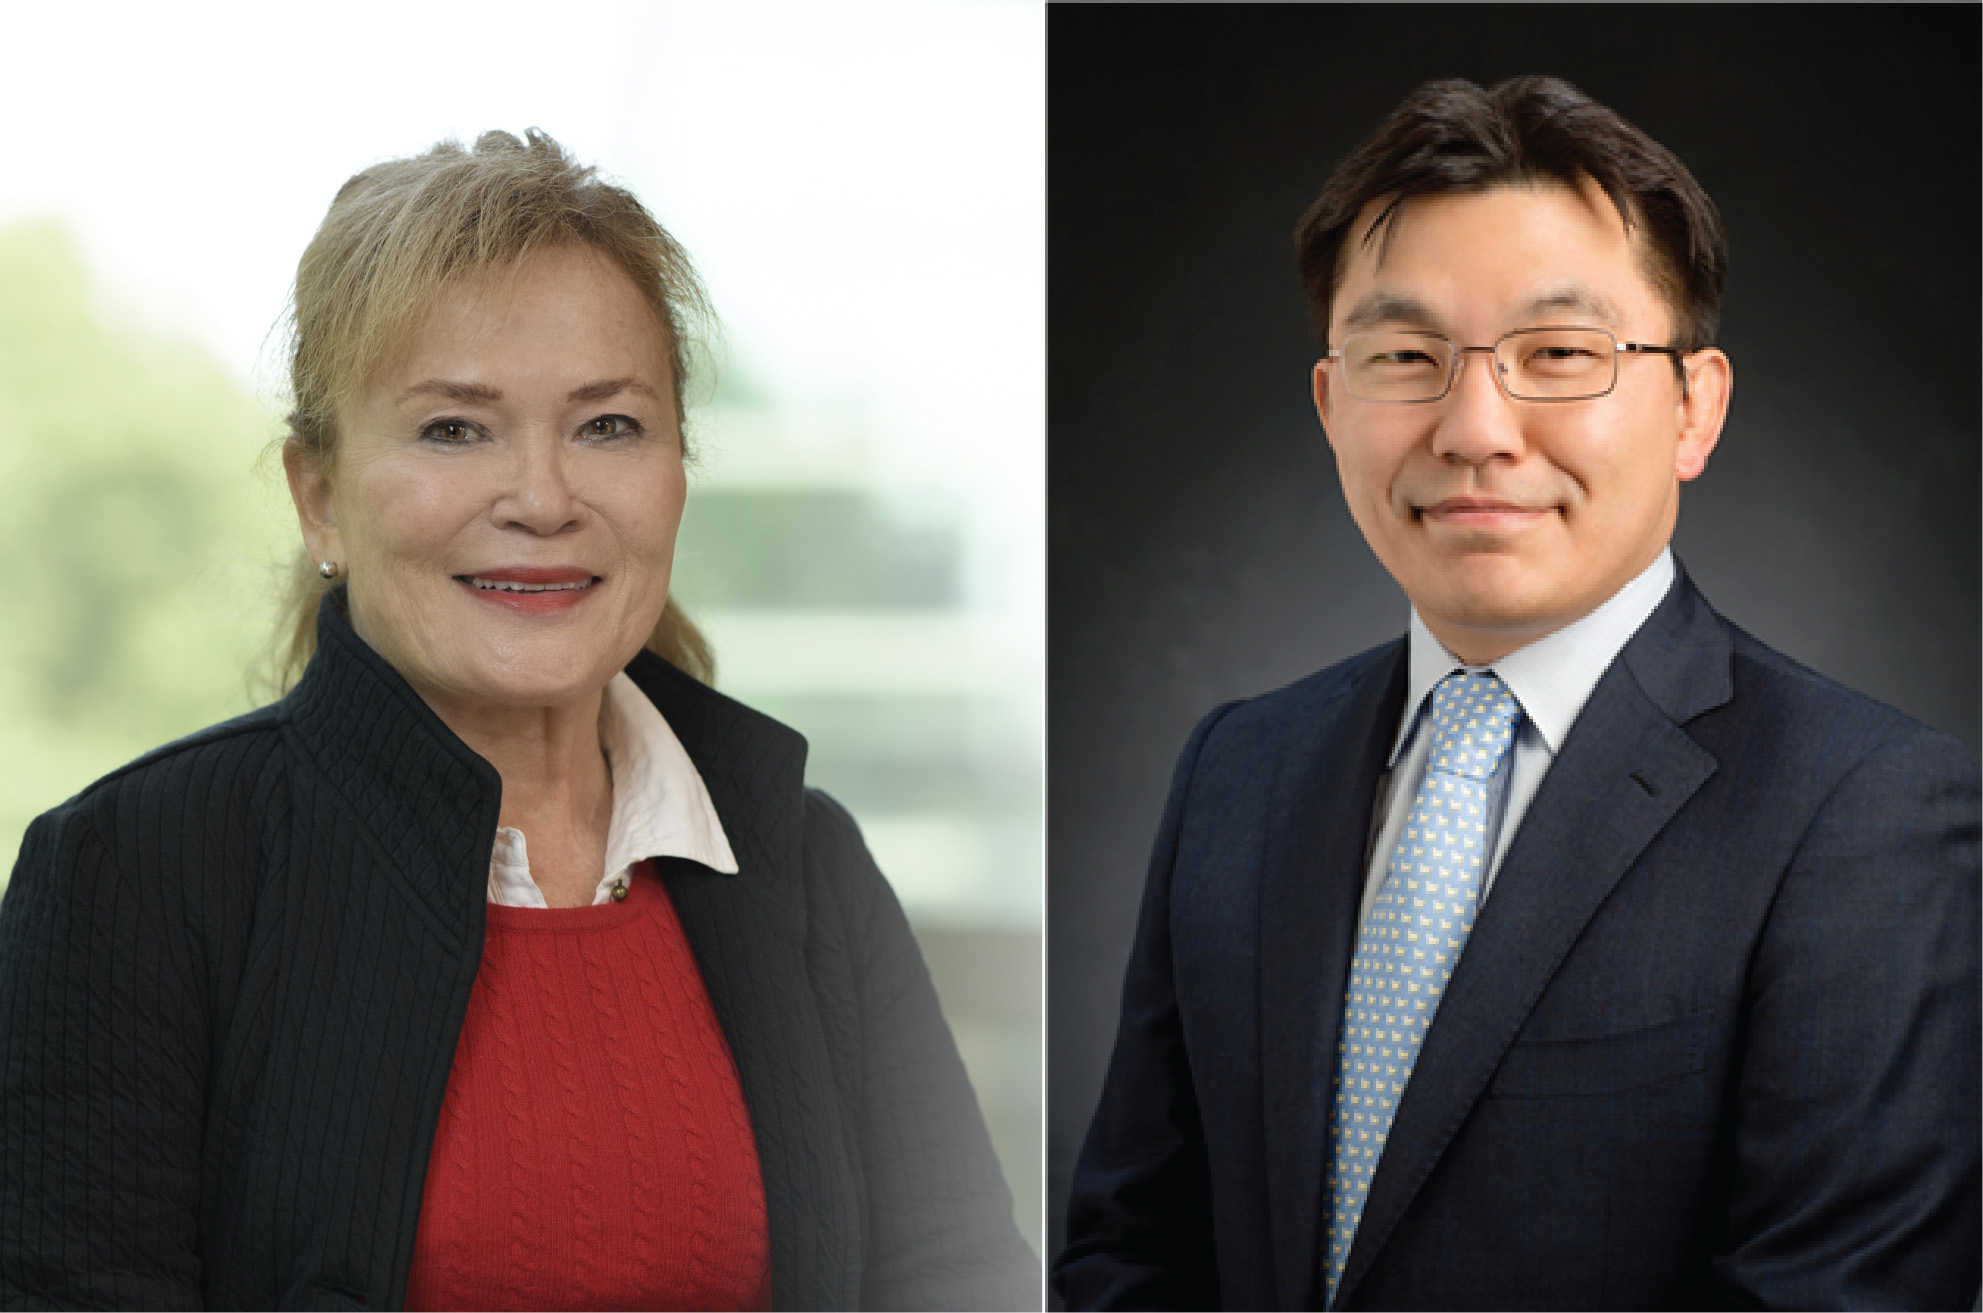 Martha Gillette (left), a professor of cell and developmental biology, brings expertise in circadian dynamics of biological systems to this collaboration. Hyunjoon Kong, a professor of chemical and biomolecular engineering, brings expertise in chip-based mimicry of biological systems.